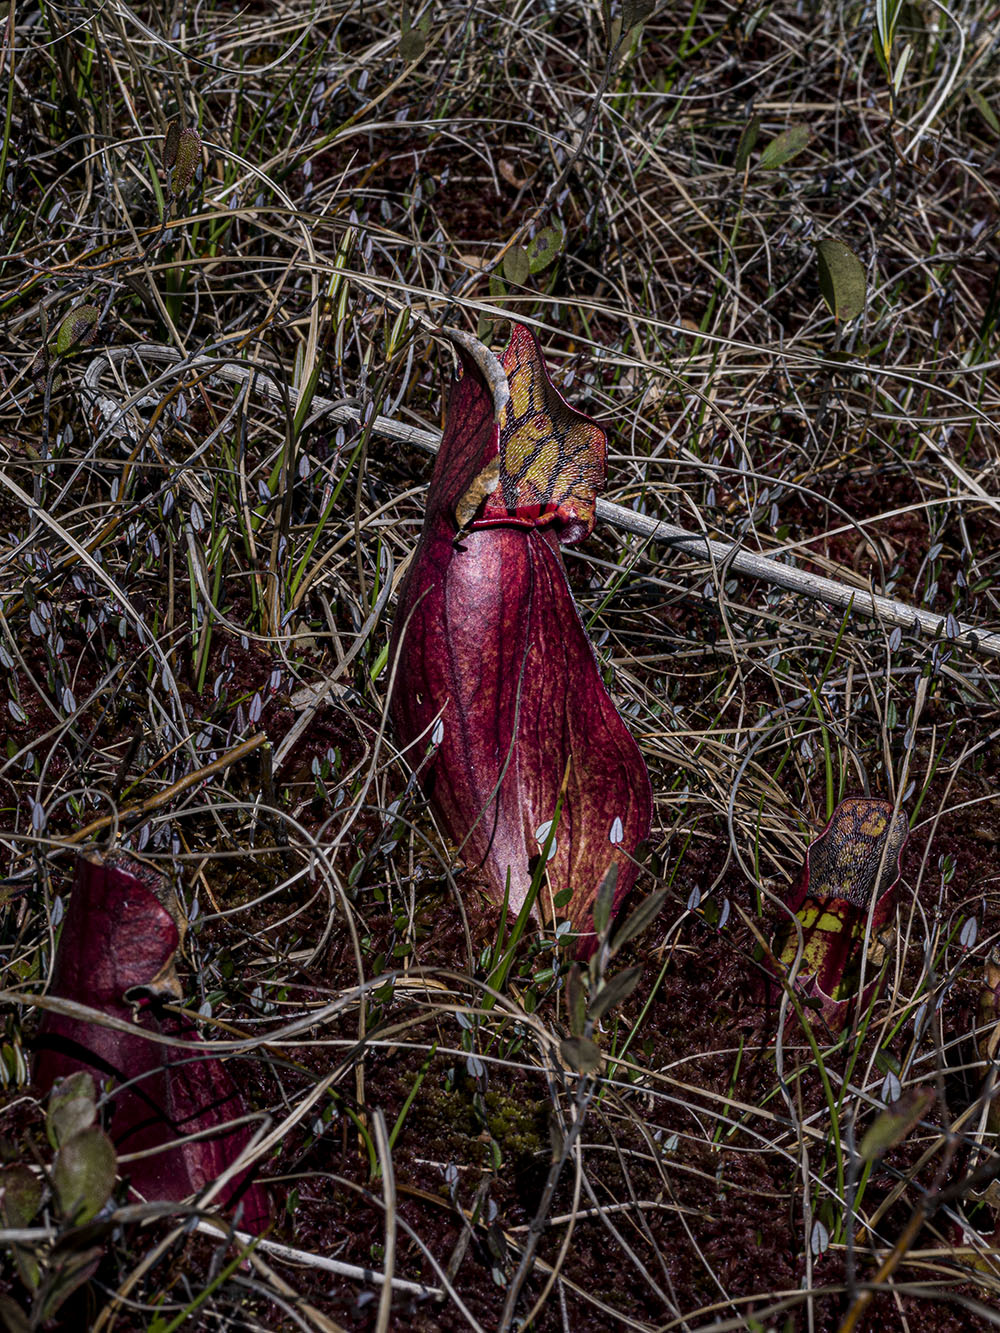 Pitcher plants in a Spruce Bog